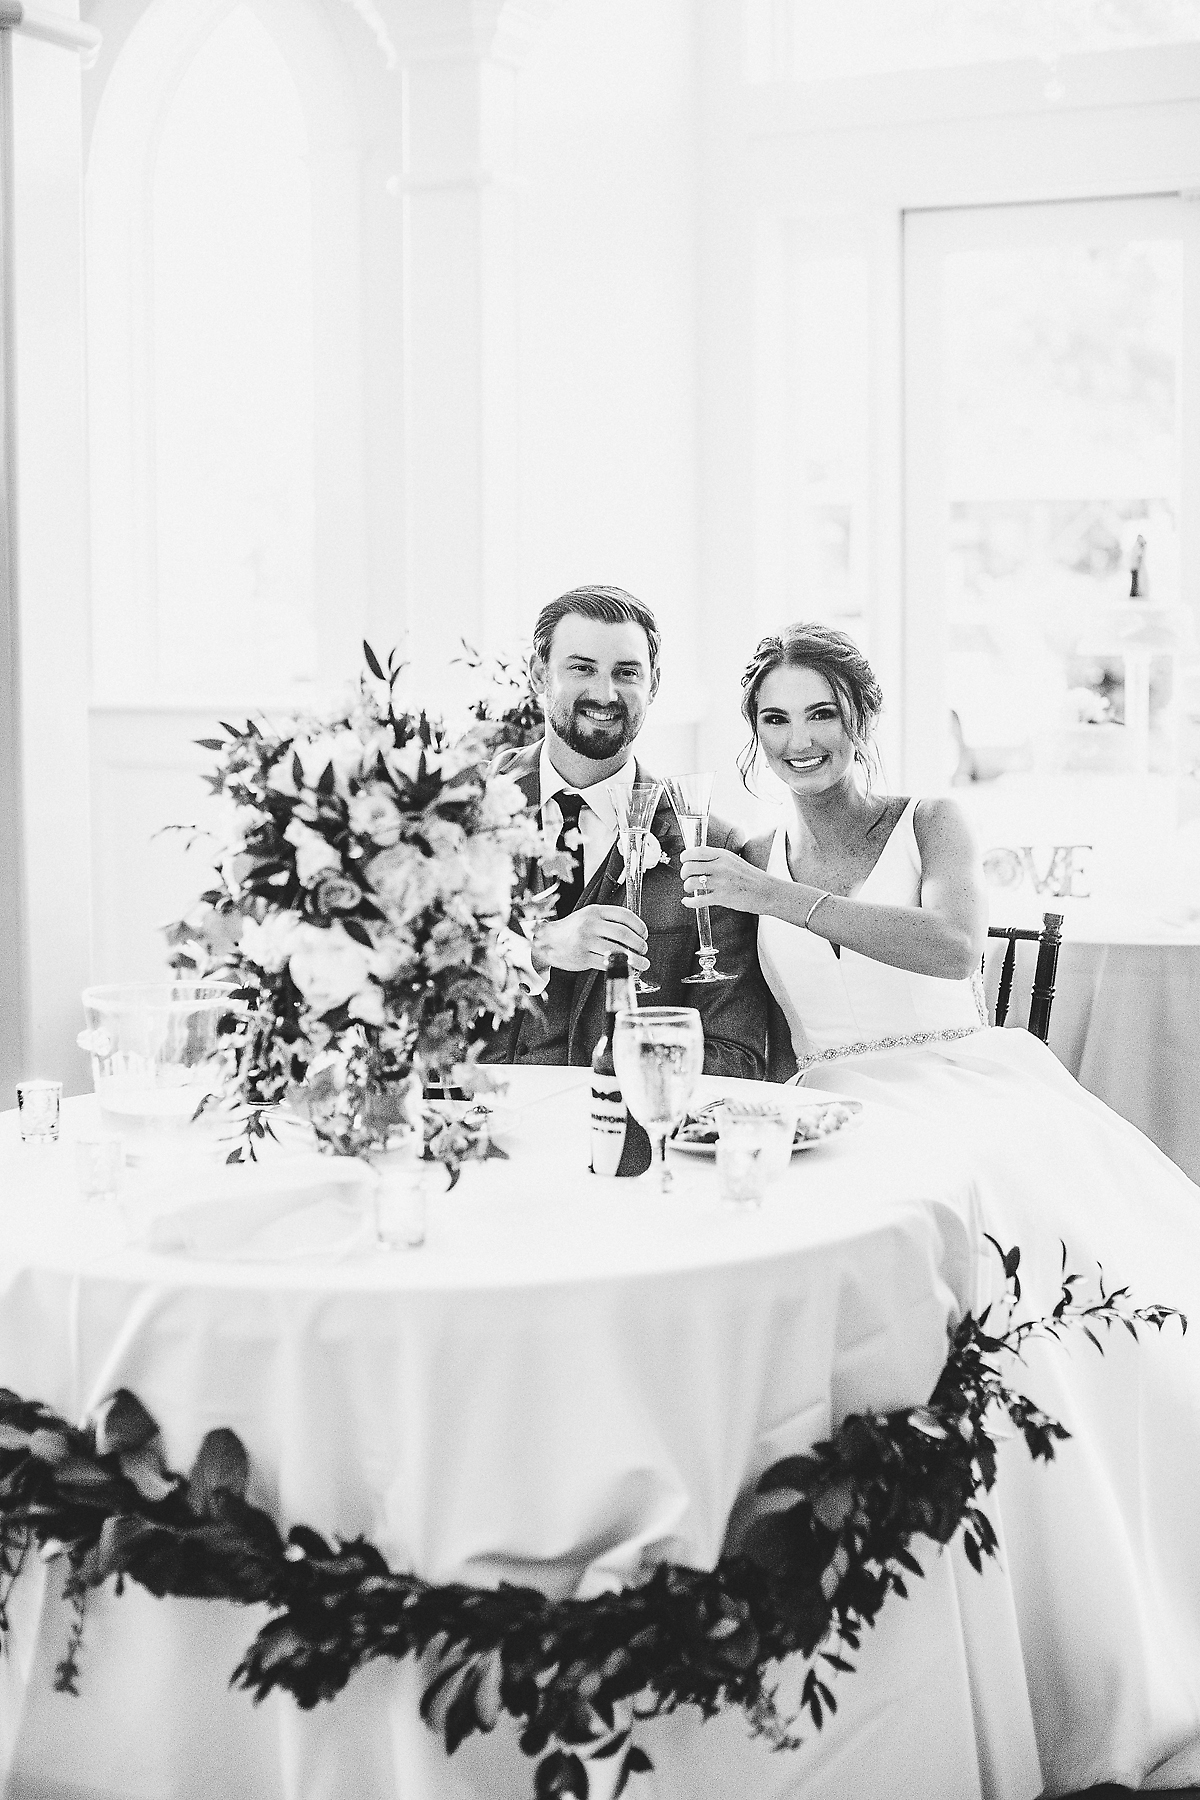 Maggie and Wesley’s Tybee Island Wedding Chapel Wedding by Izzy Hudgins Photography, Planner Design Studio South